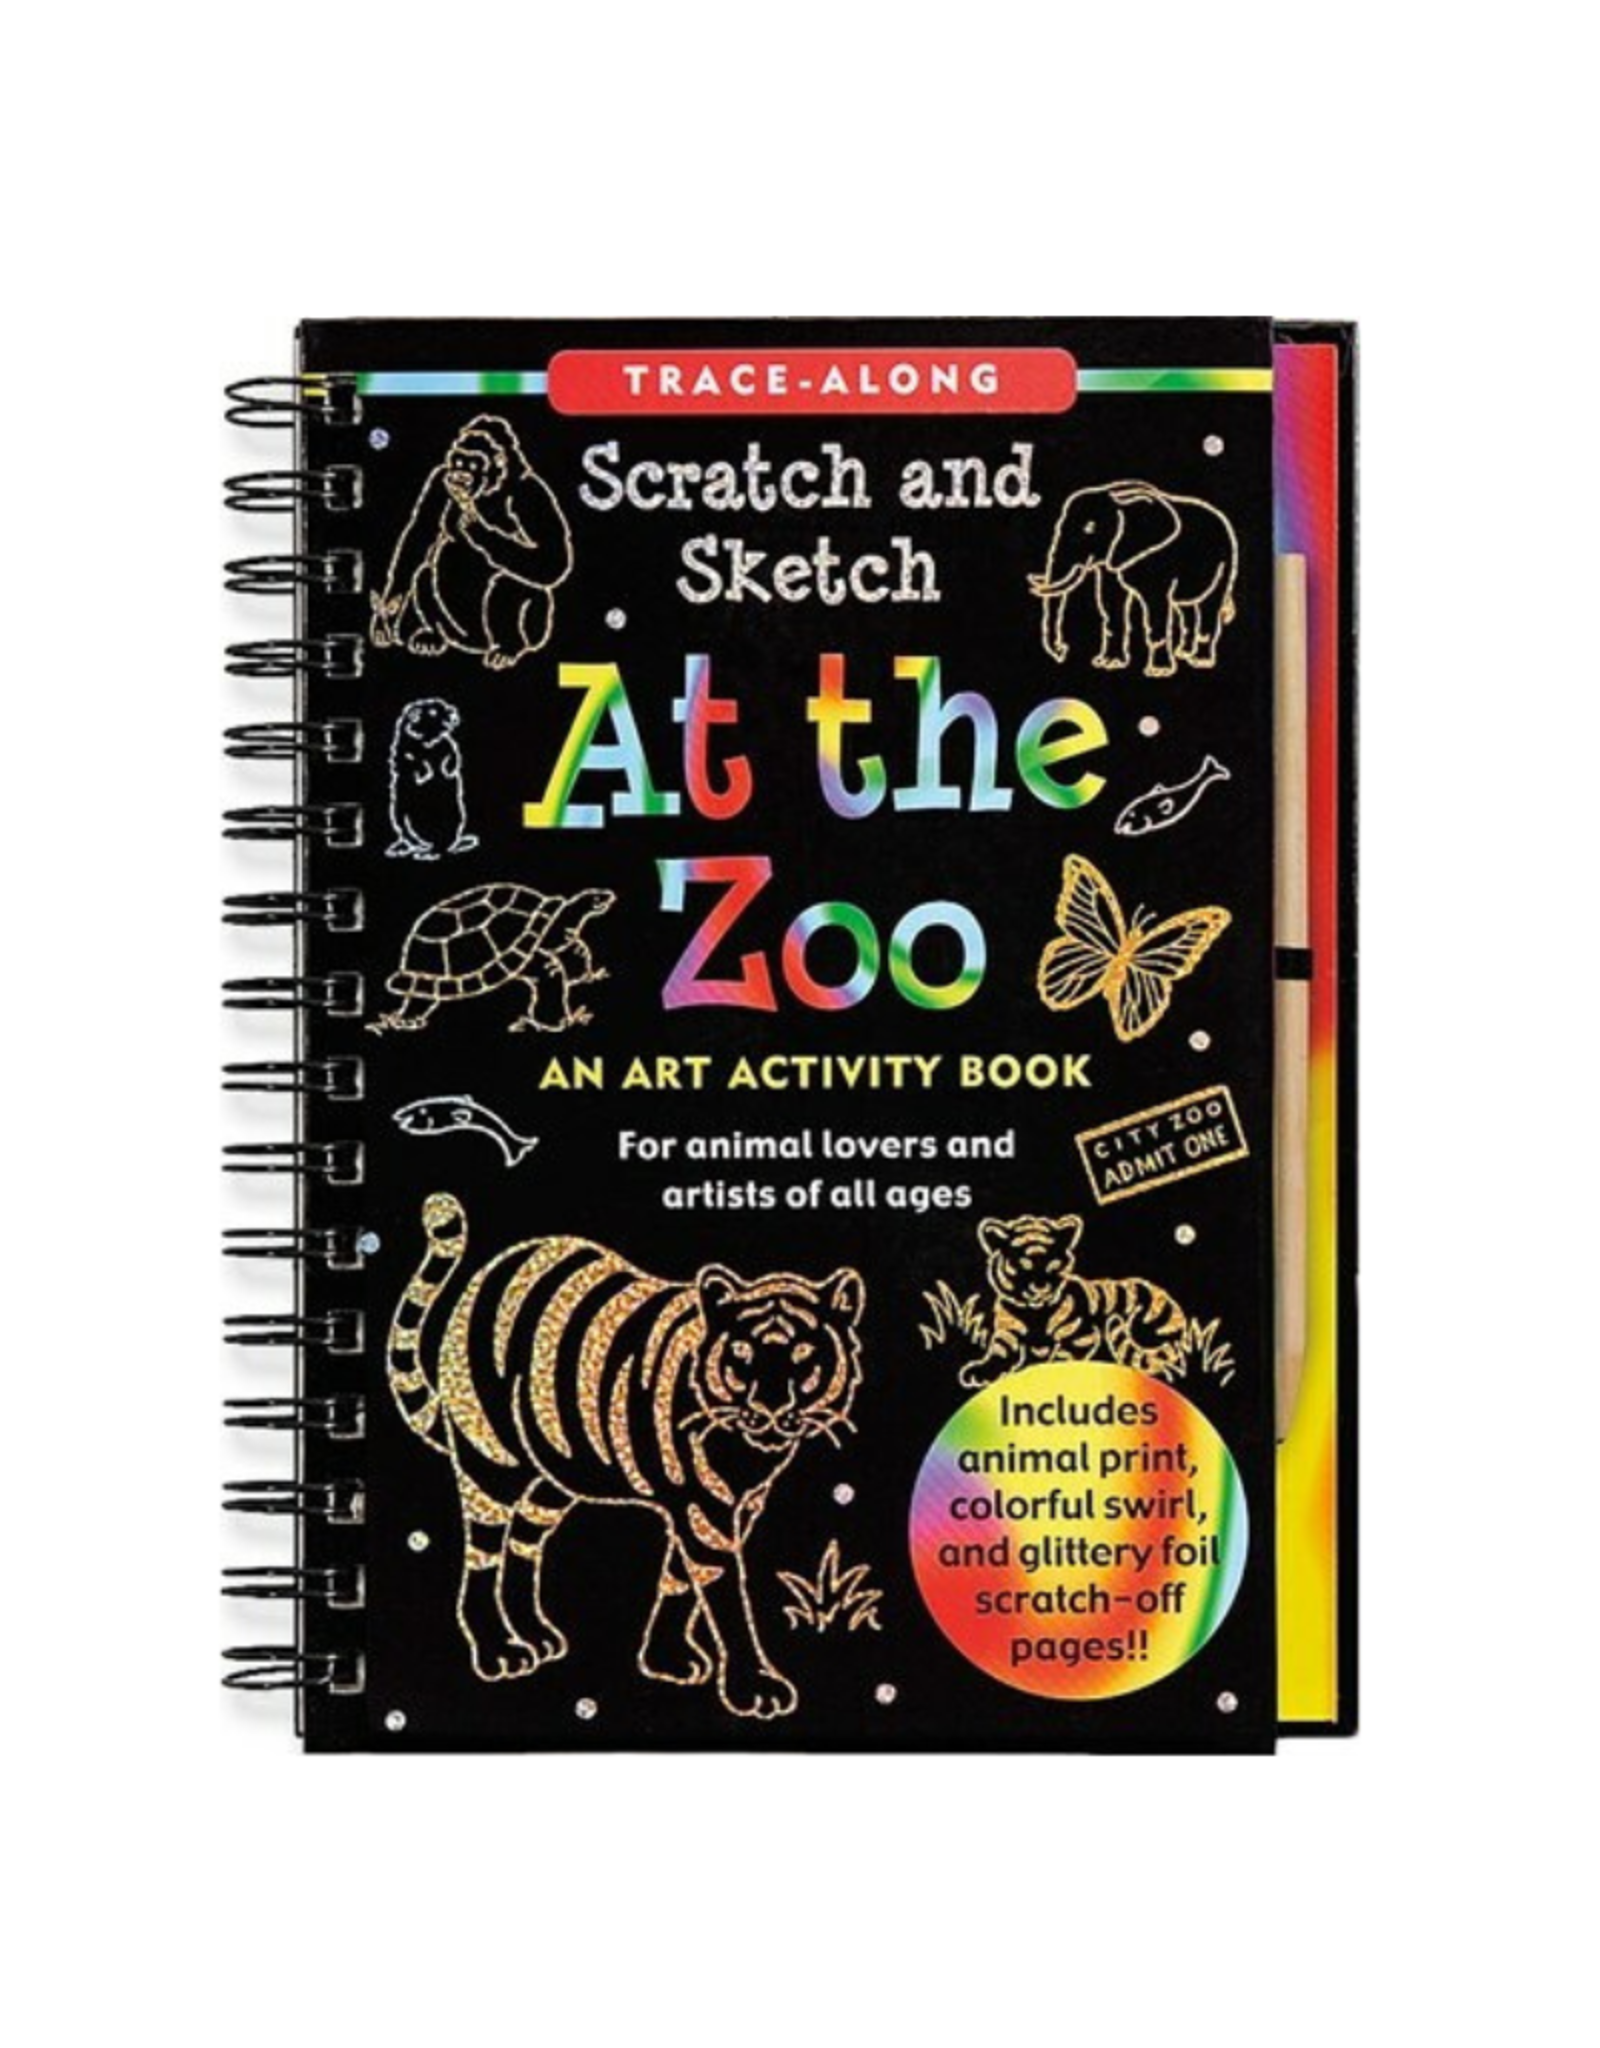 Scratch and Sketch: At the Zoo